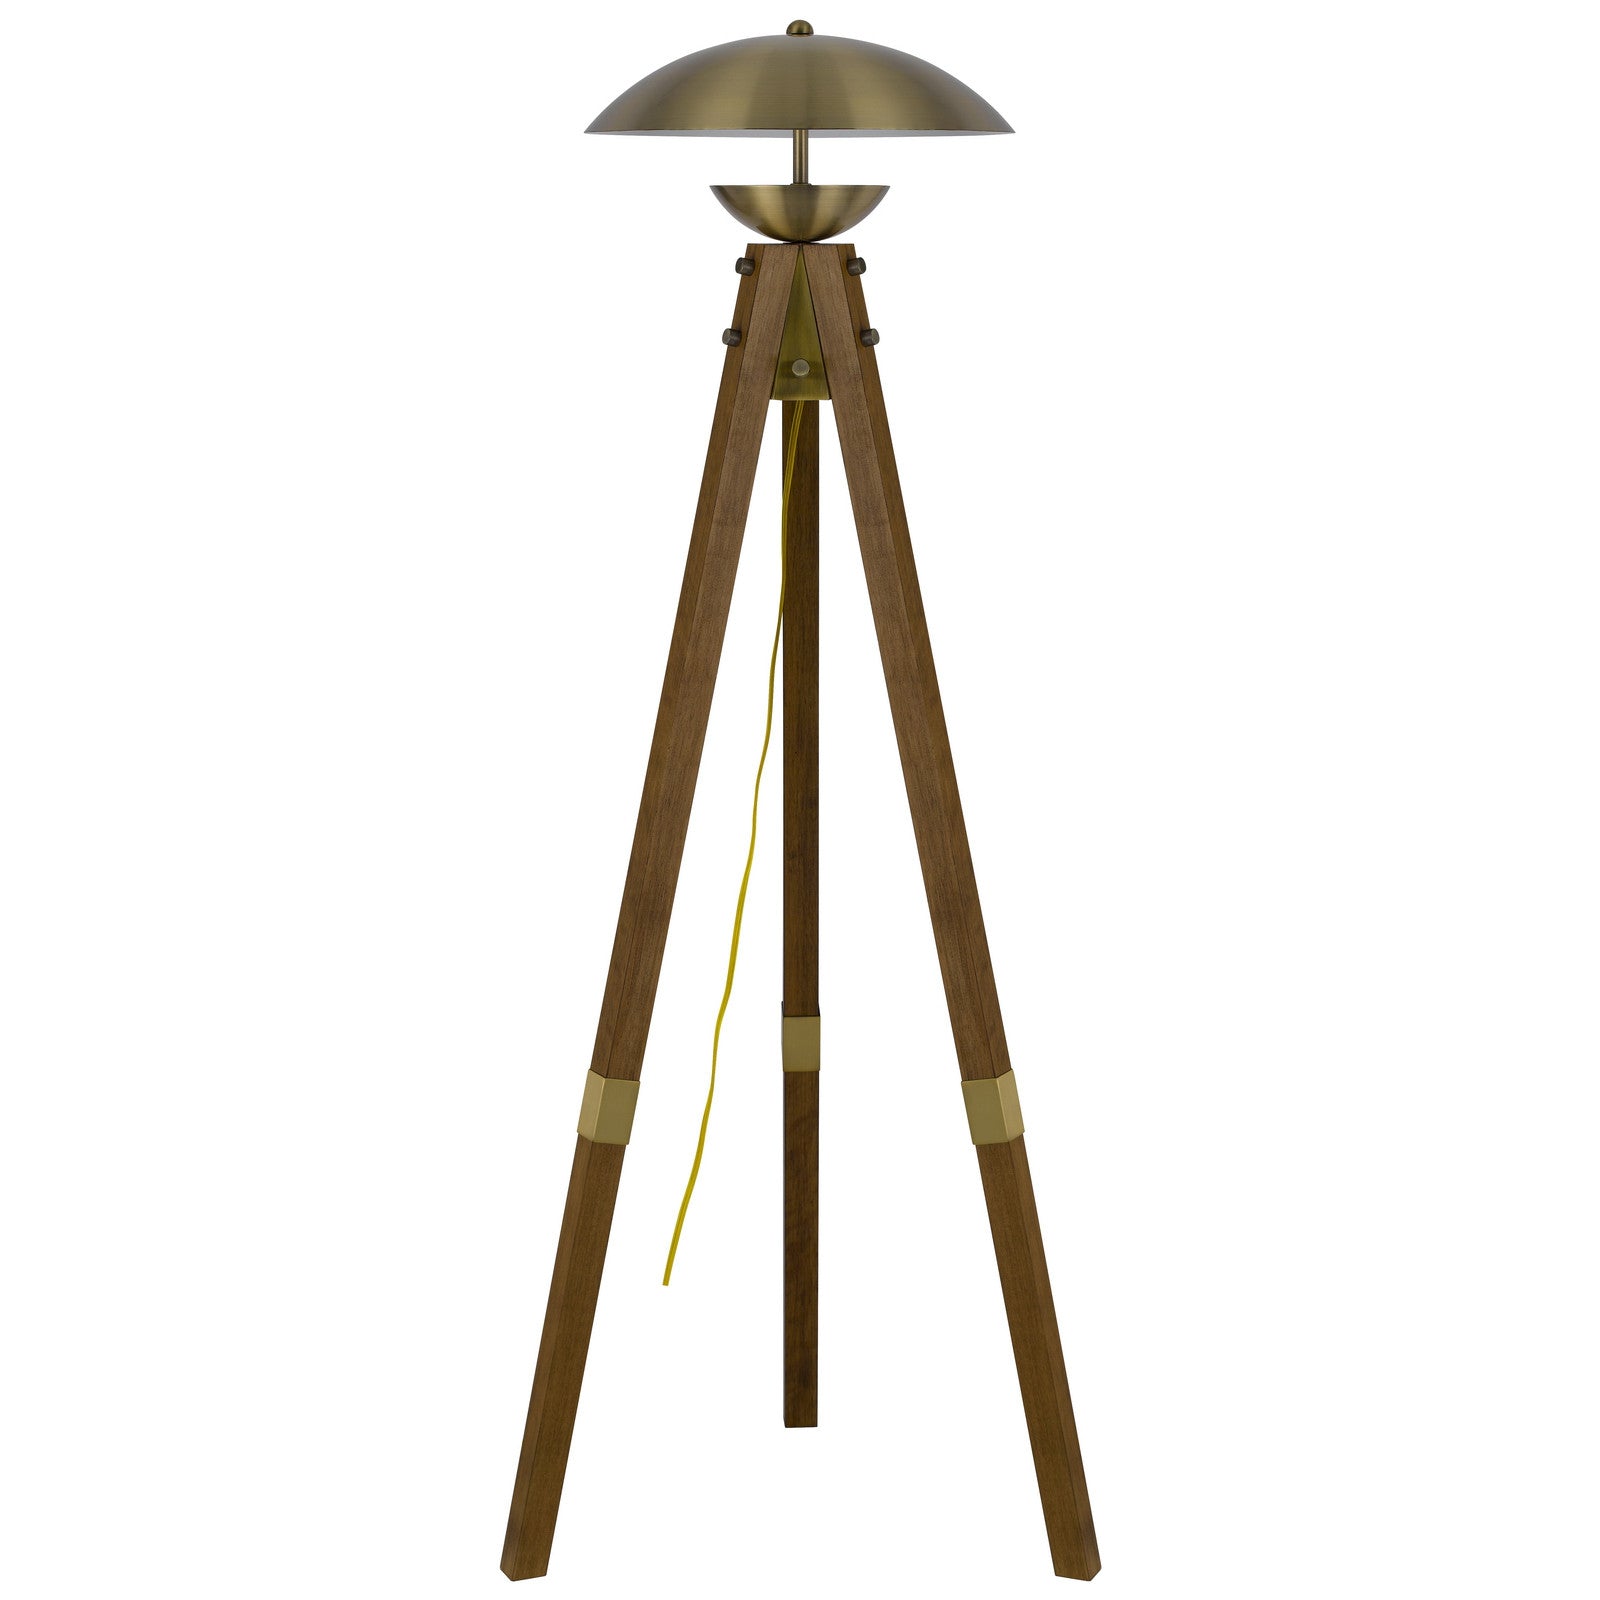 55" Brass Tripod Floor Lamp With Antiqued Brass Dome Shade